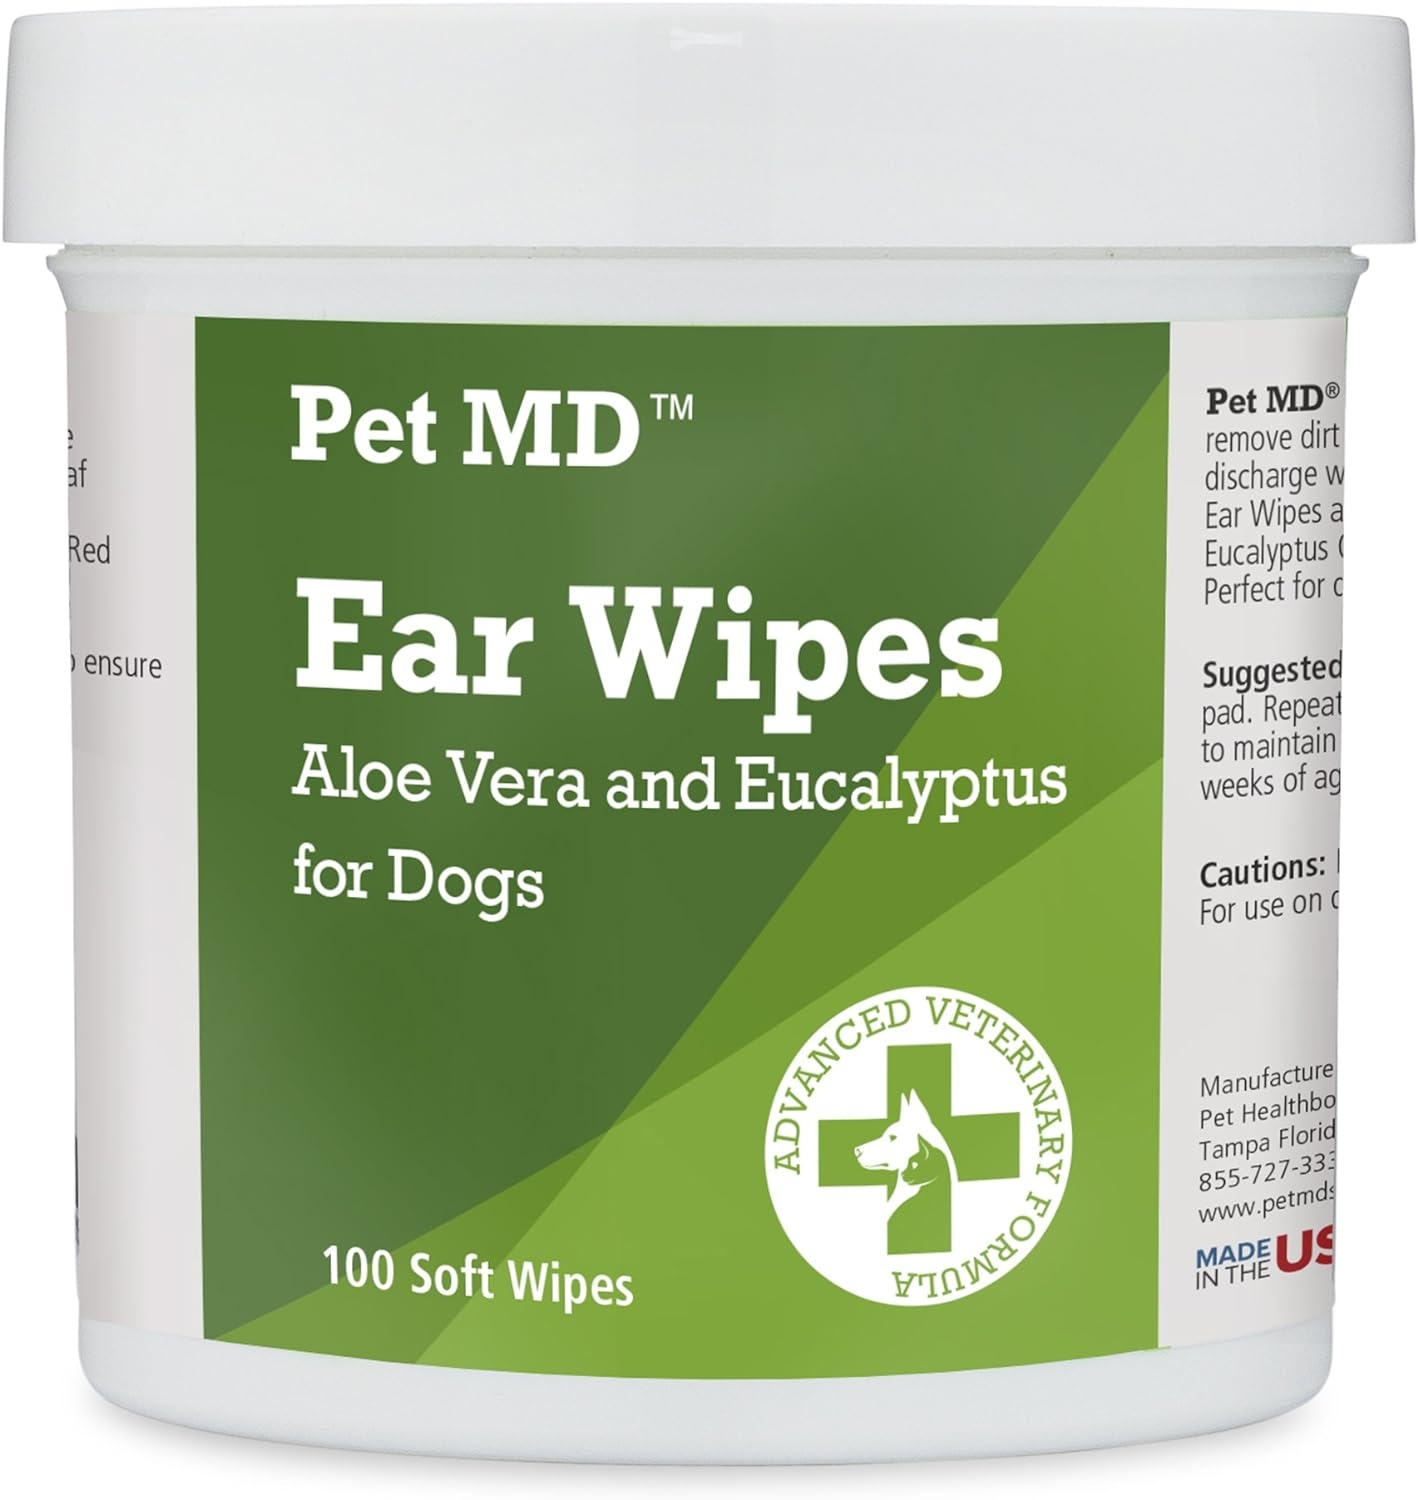 Pet MD - Dog Ear Cleaner Wipes - Otic Cleanser for Dogs to Stop Ear Itching, Yeast and Infections with Aloe and Eucalyptus - 100 Count